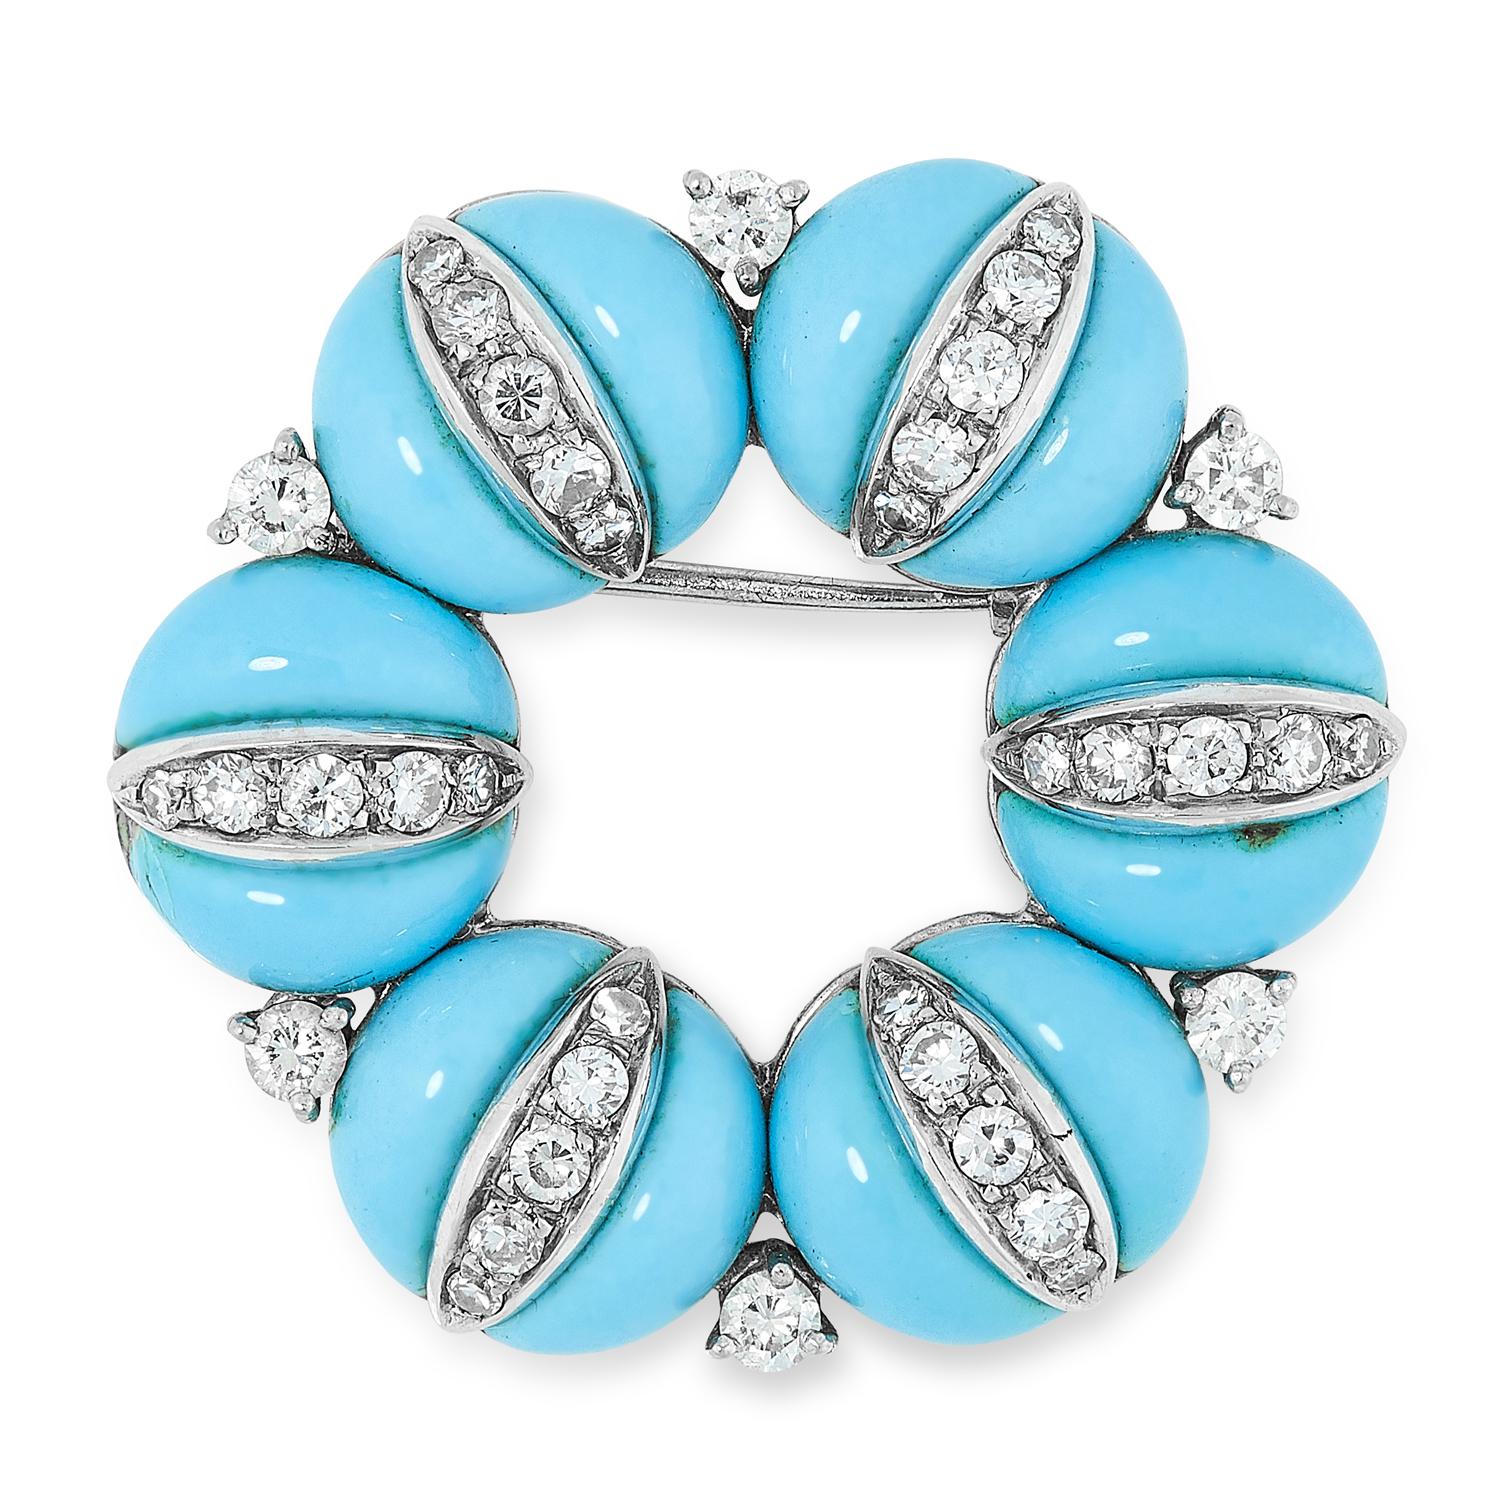 Tiffany & Co. turquoise blue enamel and diamond wreath brooch in 18 karat white and yellow gold, Italian, 1960s. Of circular openwork design, this jewel is composed of six circular domed segments embellished with blue enamel and accented with round